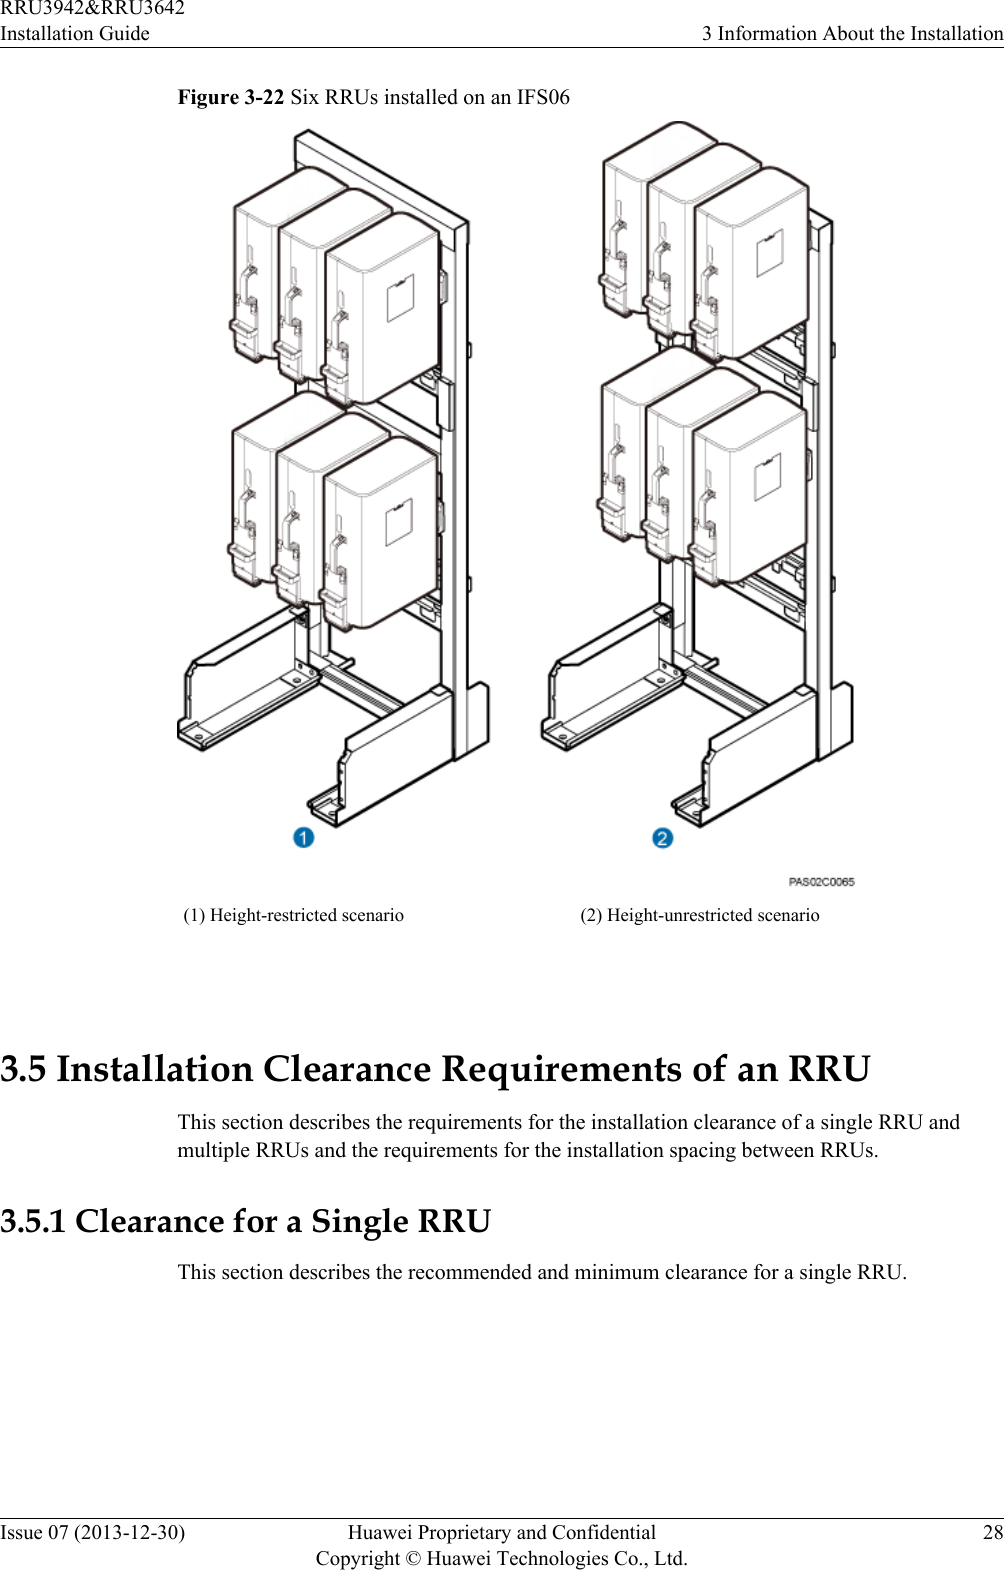 Figure 3-22 Six RRUs installed on an IFS06(1) Height-restricted scenario (2) Height-unrestricted scenario 3.5 Installation Clearance Requirements of an RRUThis section describes the requirements for the installation clearance of a single RRU andmultiple RRUs and the requirements for the installation spacing between RRUs.3.5.1 Clearance for a Single RRUThis section describes the recommended and minimum clearance for a single RRU.RRU3942&amp;RRU3642Installation Guide 3 Information About the InstallationIssue 07 (2013-12-30) Huawei Proprietary and ConfidentialCopyright © Huawei Technologies Co., Ltd.28